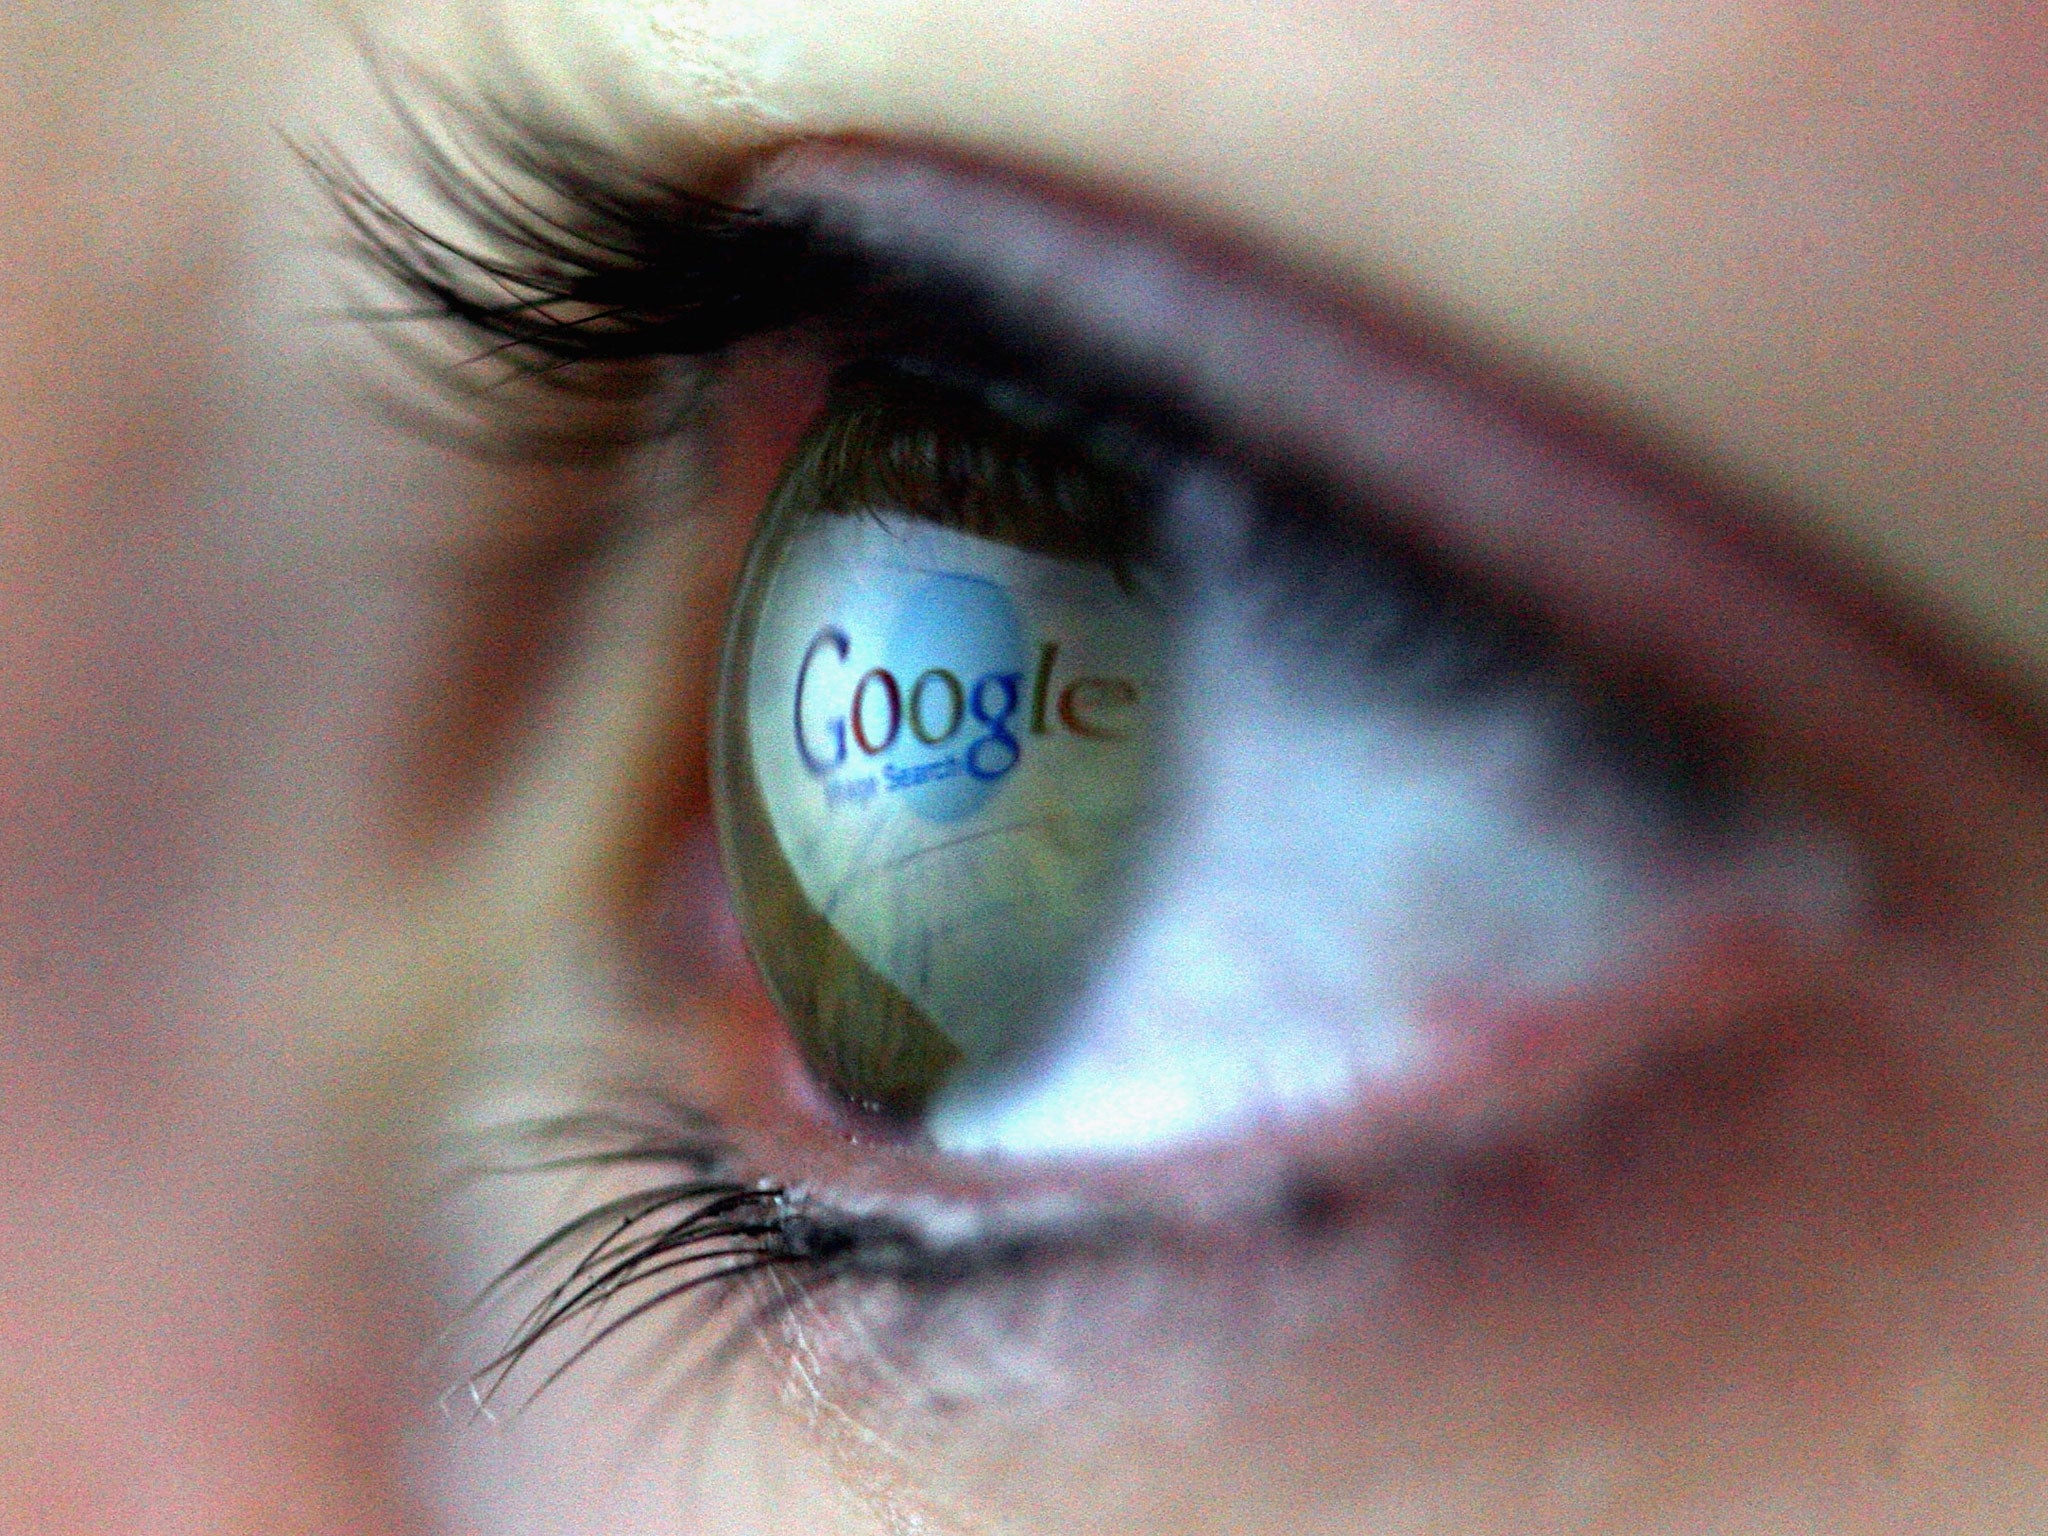 MPs have criticised the £130 million tax settlement agreed by Google and the Government last month